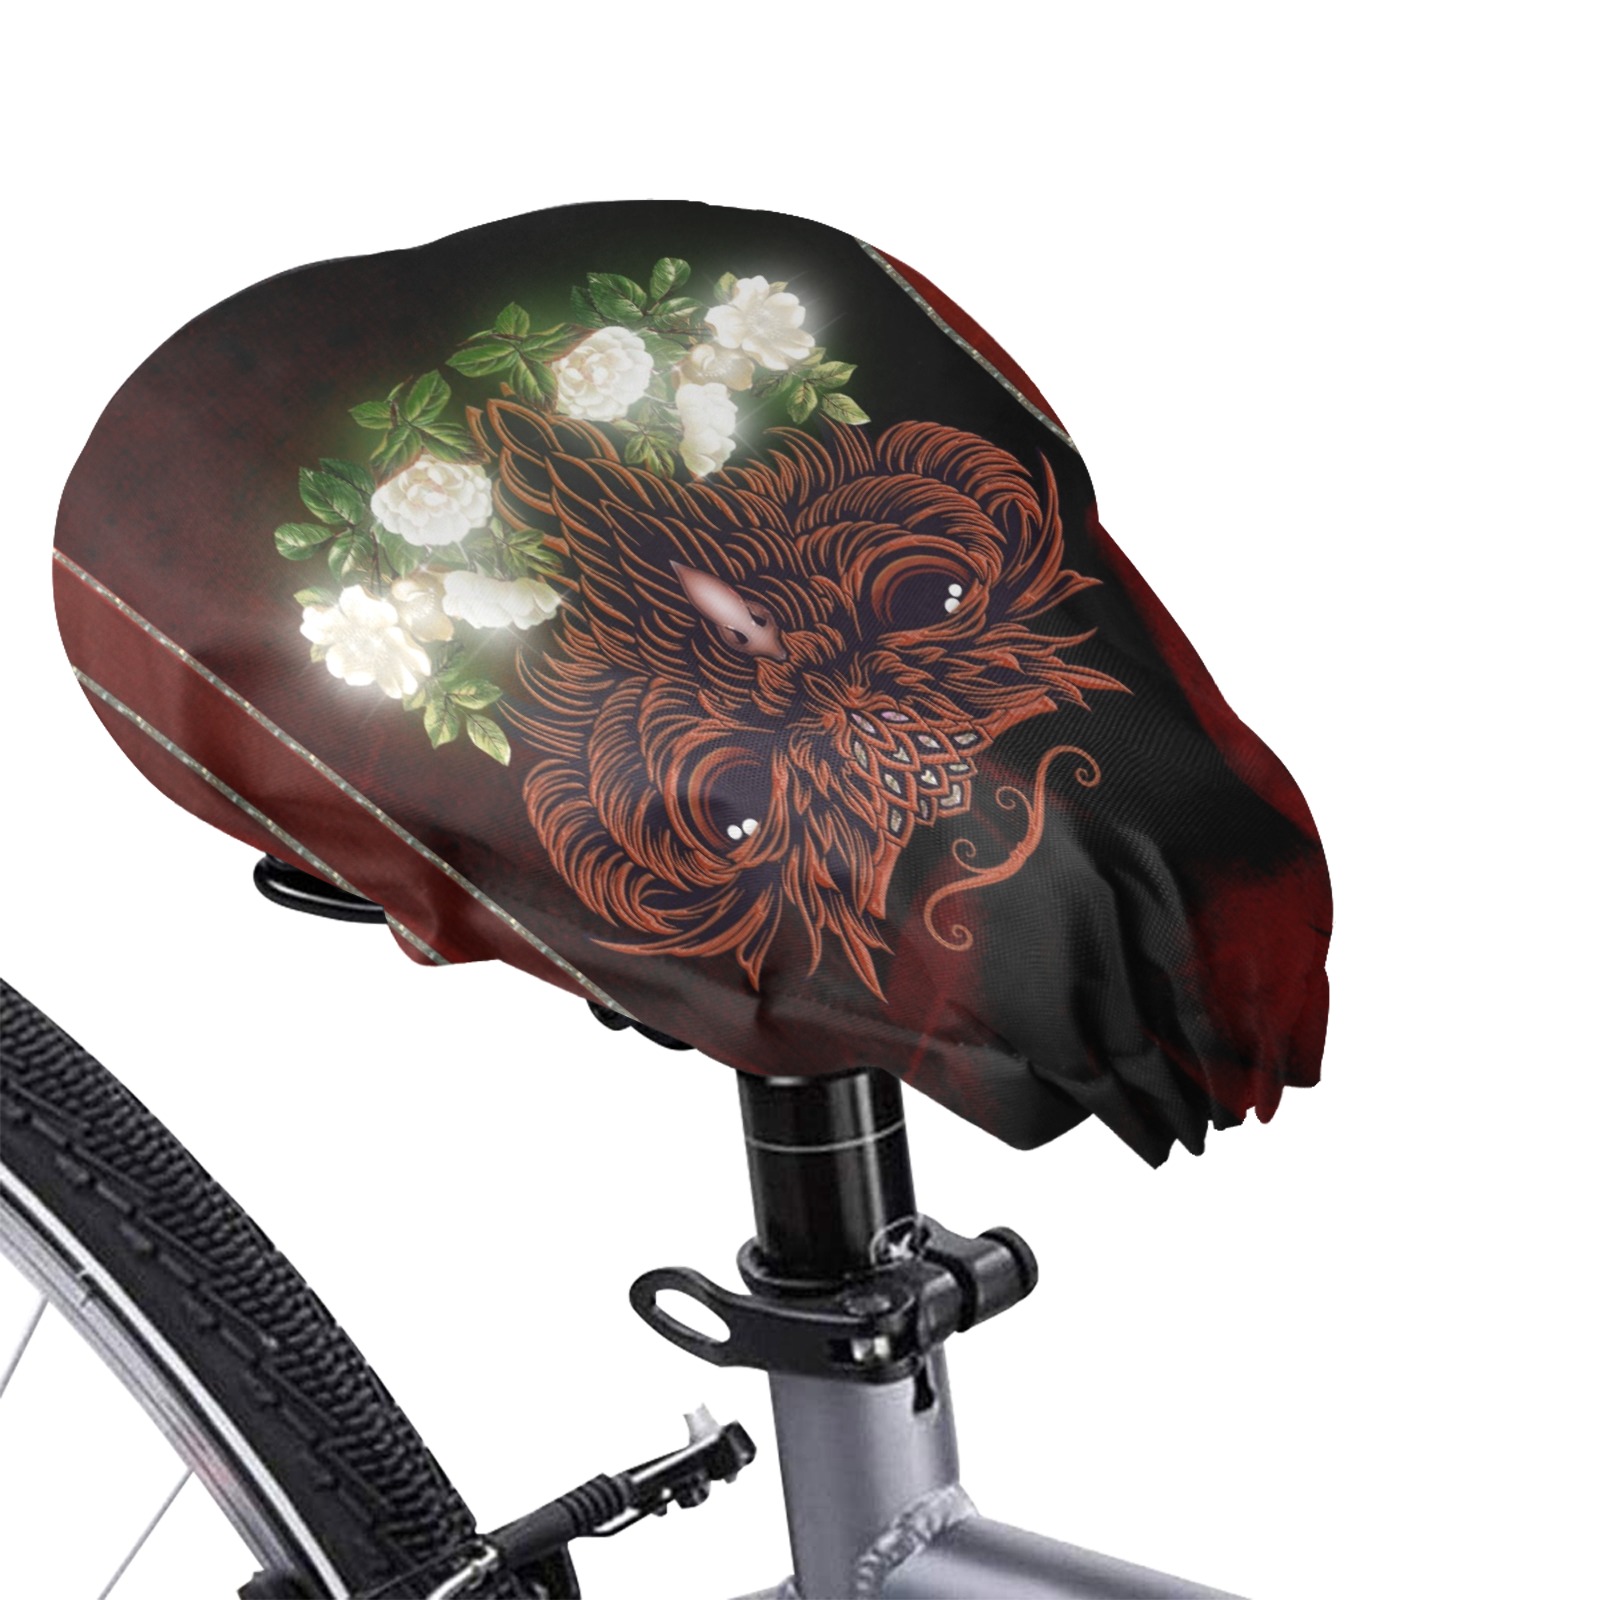 Awesome owl with flowers Waterproof Bicycle Seat Cover